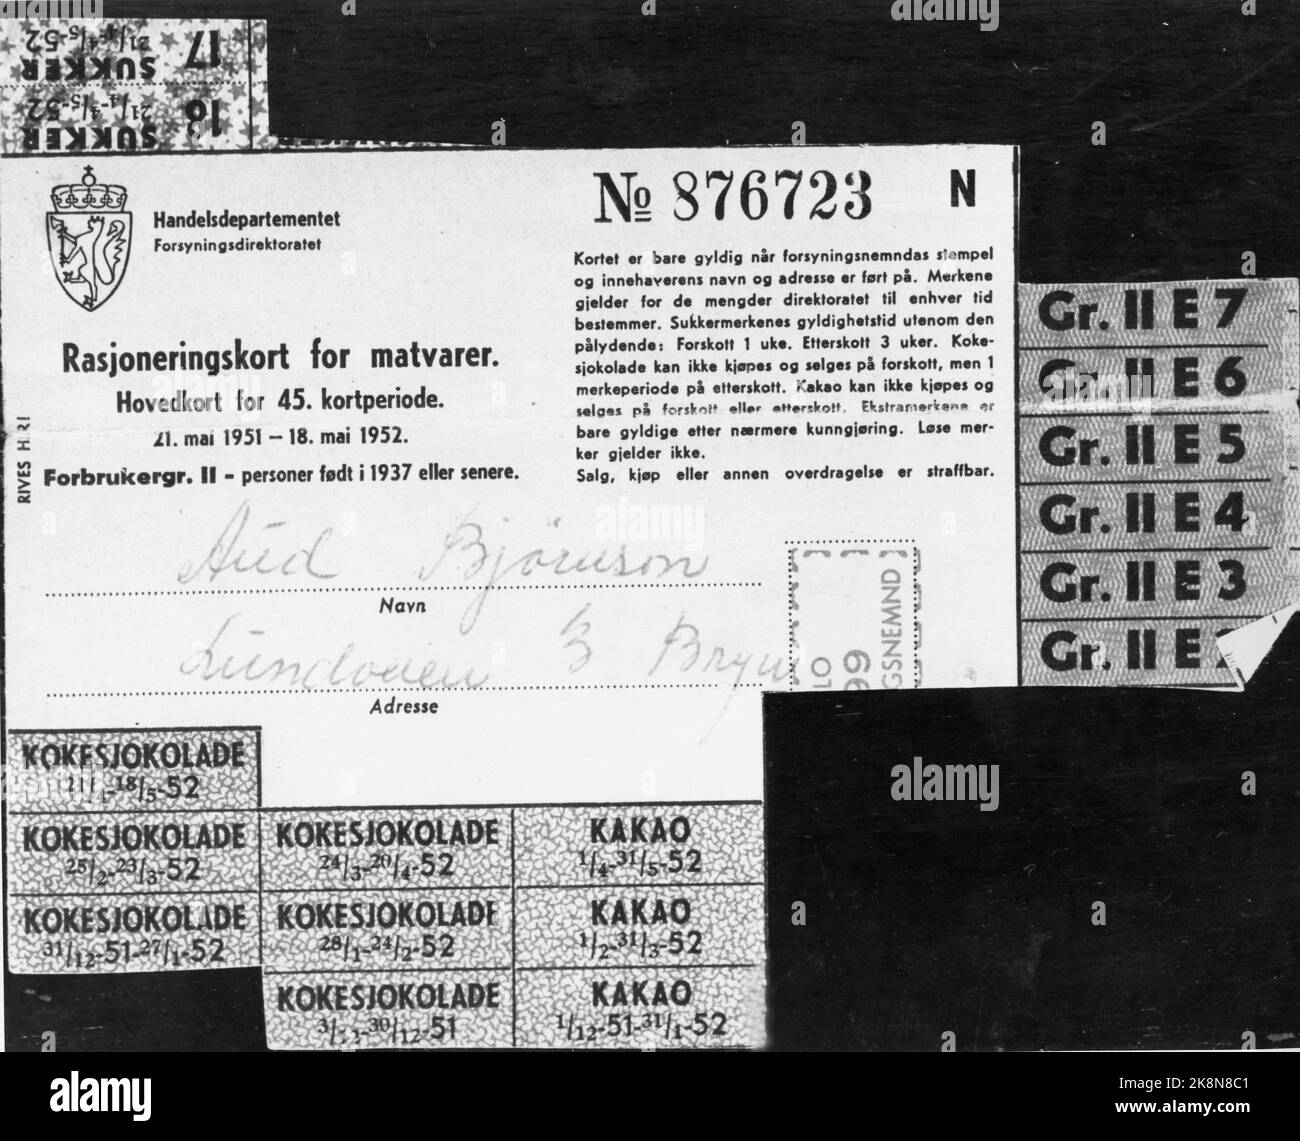 Oslo 1951: Rationing. Rationing goods lasted long after the war. Here is a ration card for foods- issued for the period 21 May 1951 to 18 May 1952. This card applies, among other things. Cooking chocolate and cocoa, and are issued by the Ministry of Trade, the Directorate of Supply. Photo: NTB / NTB Stock Photo